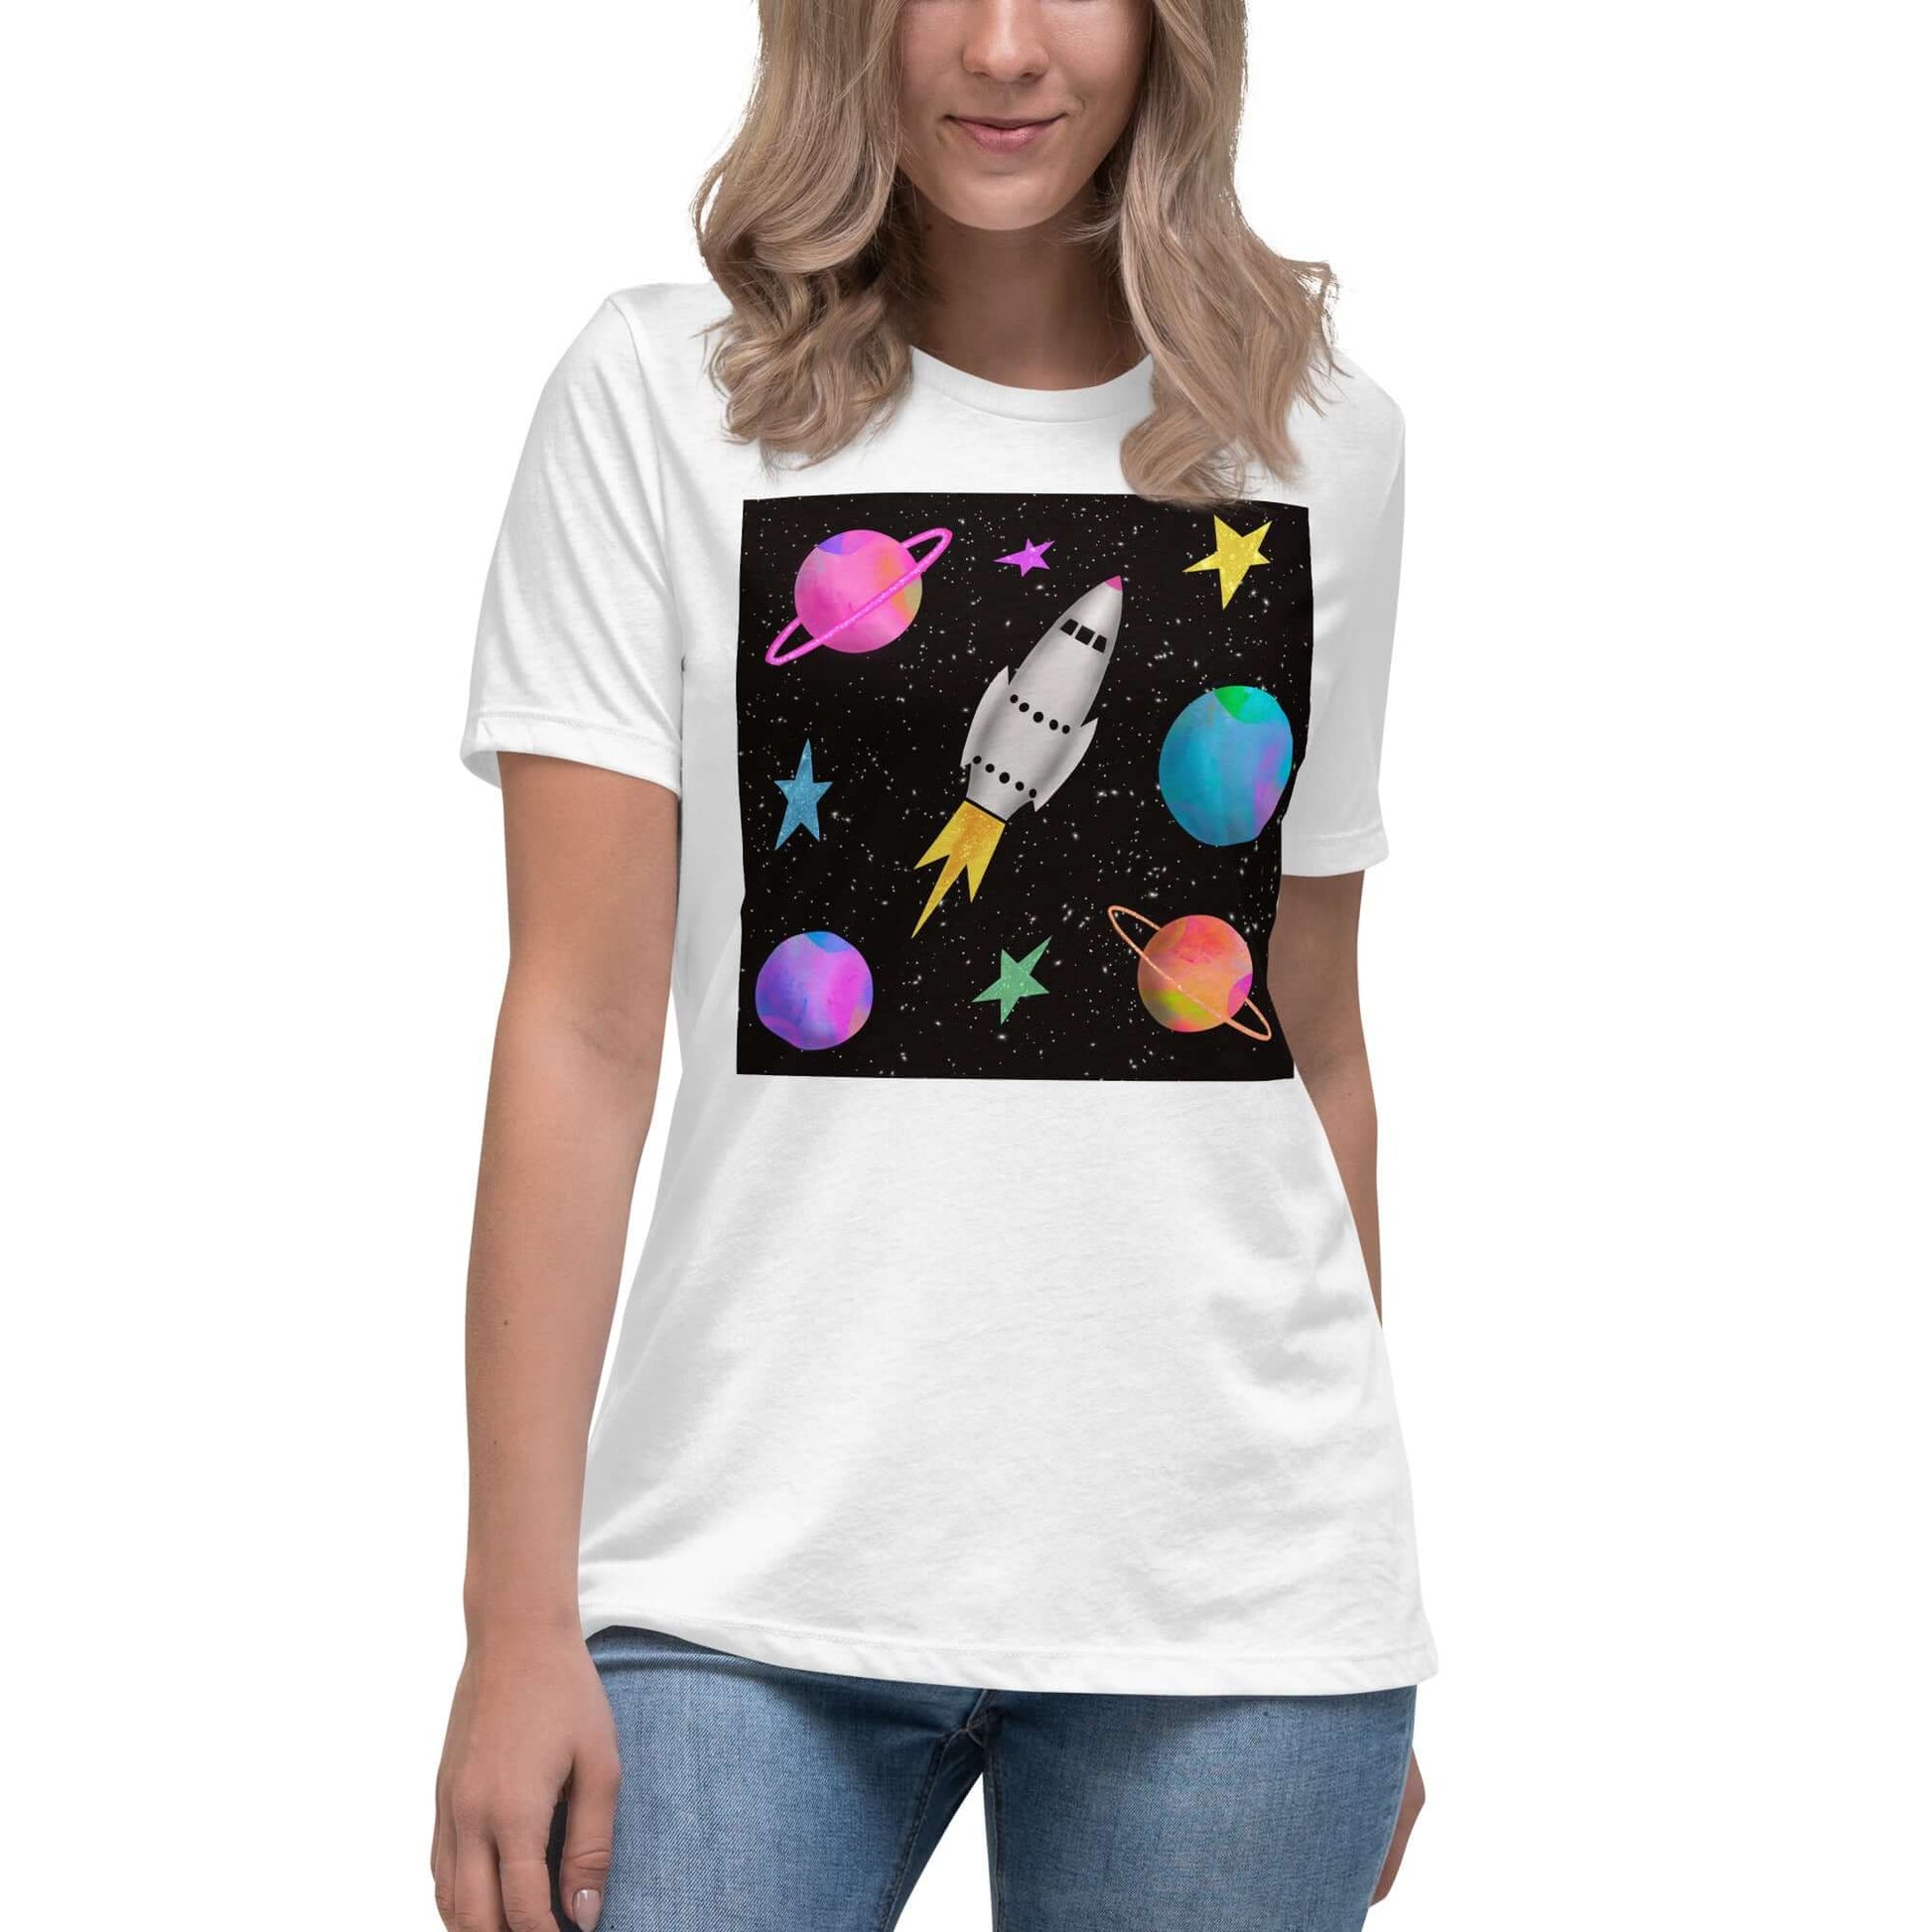 Rocket with Colorful Stars and Planets “Space Rockets” Women’s Short Sleeve Tee in White